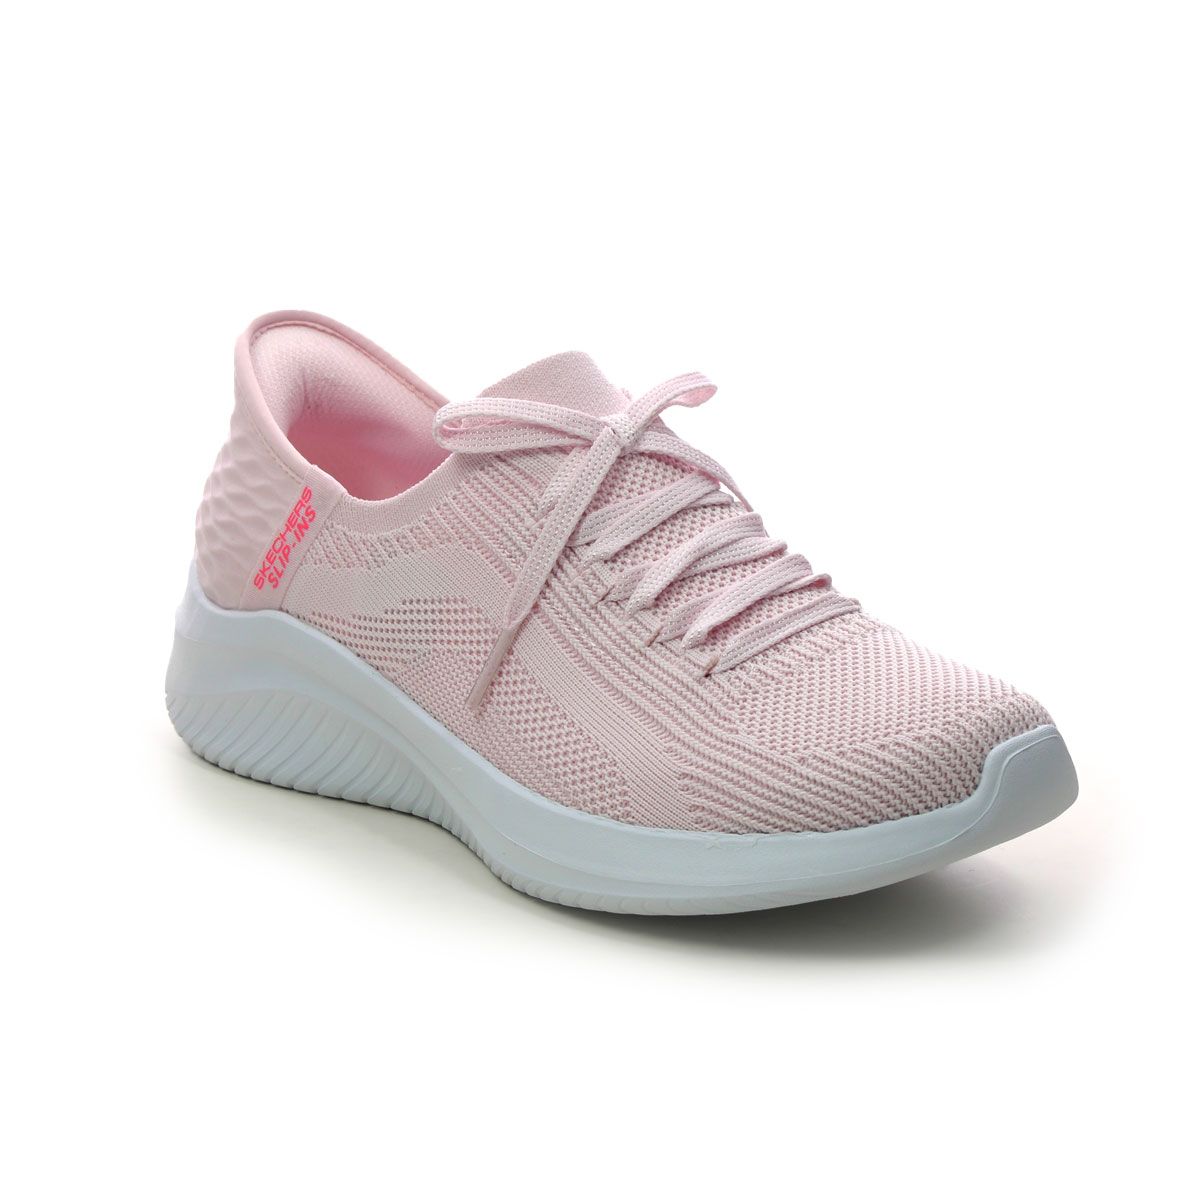 Skechers Slip Ins Ultra LTPK Light pink Womens trainers 149710 in a Plain Textile in Size 3